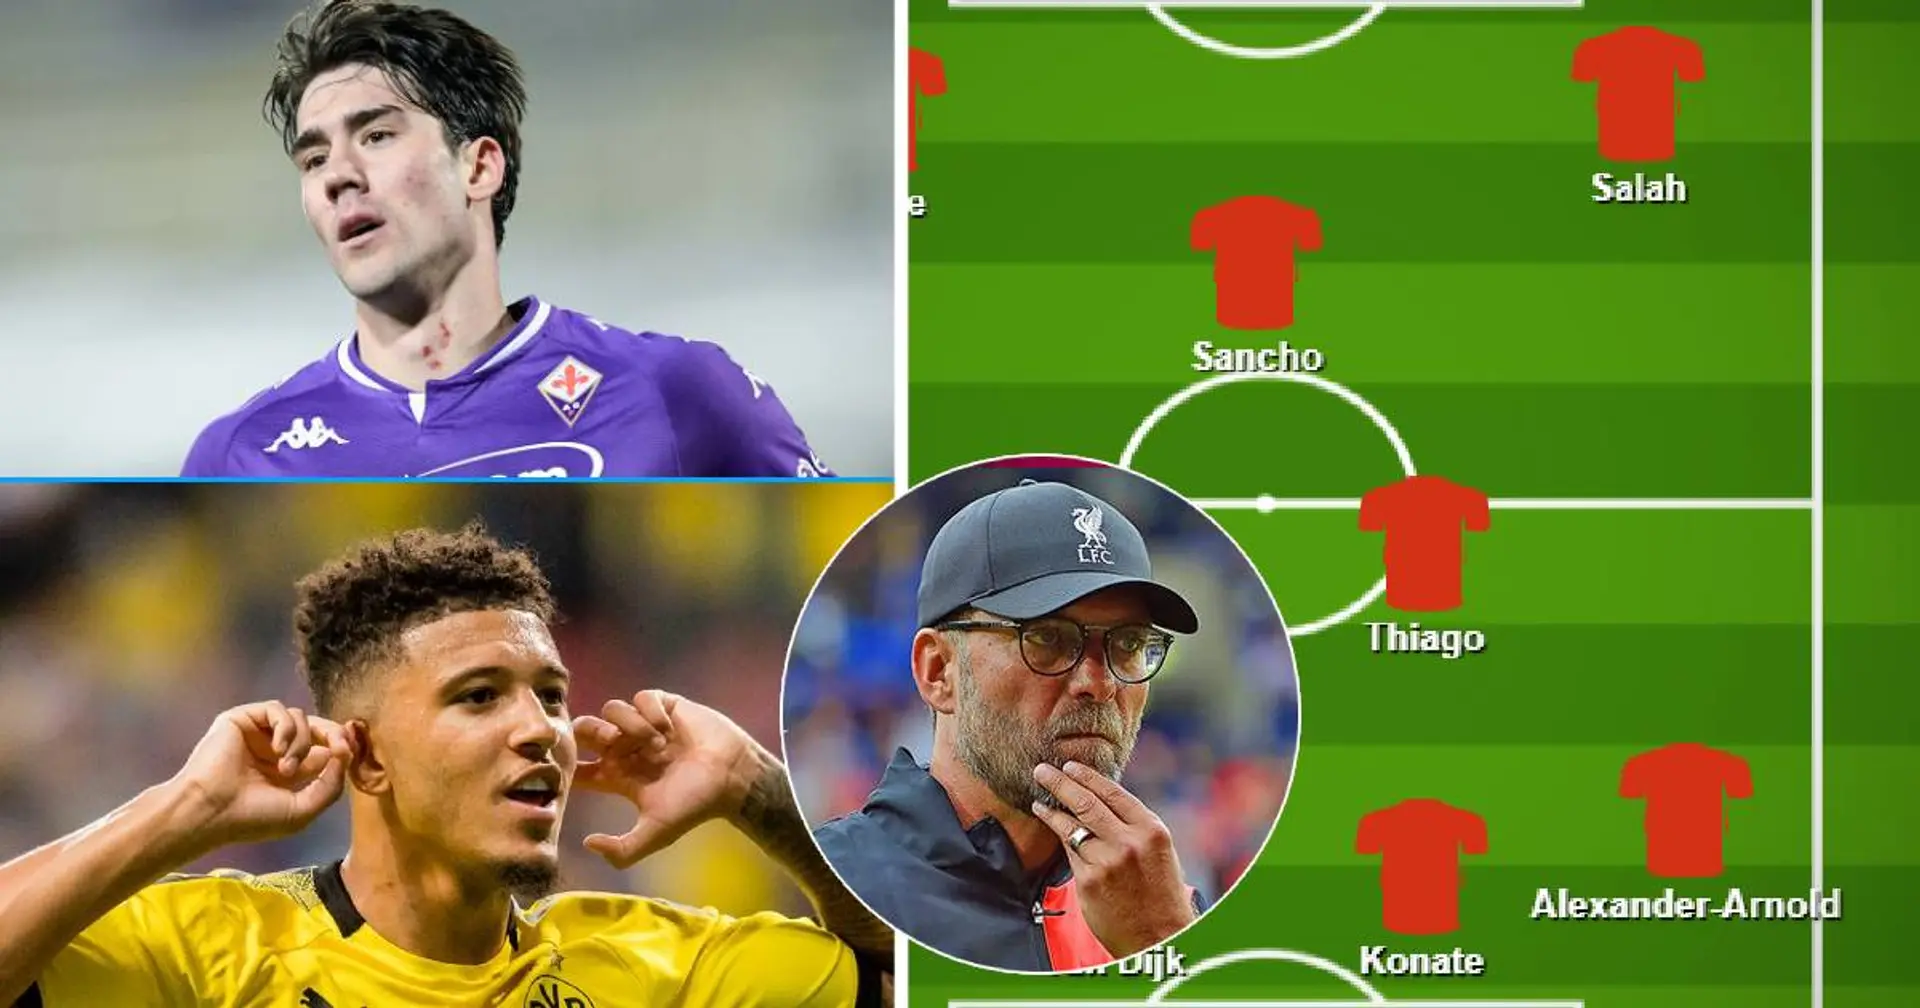 Getting Sancho, not signing any forward? 3 scenarios for Liverpool's summer transfer business